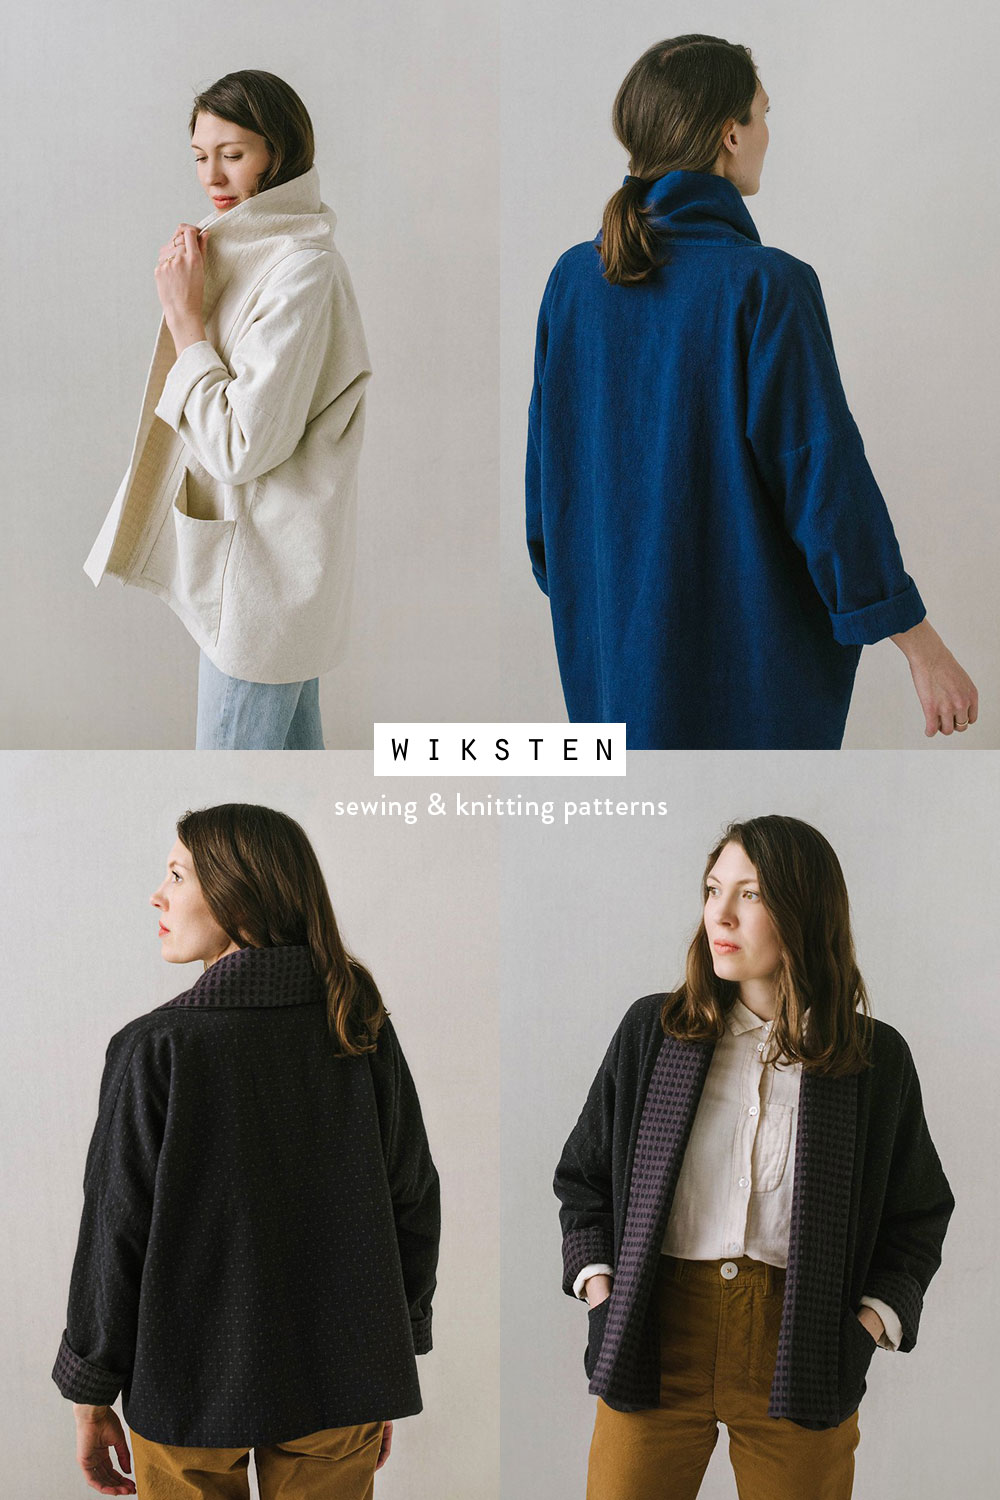 Meet the Maker blog series: Jenny Gordy of Wiksten creates simple, elegant, easy to follow garment patterns. Follow this blog series to learn about more pattern writers and artists in the sewing industry.